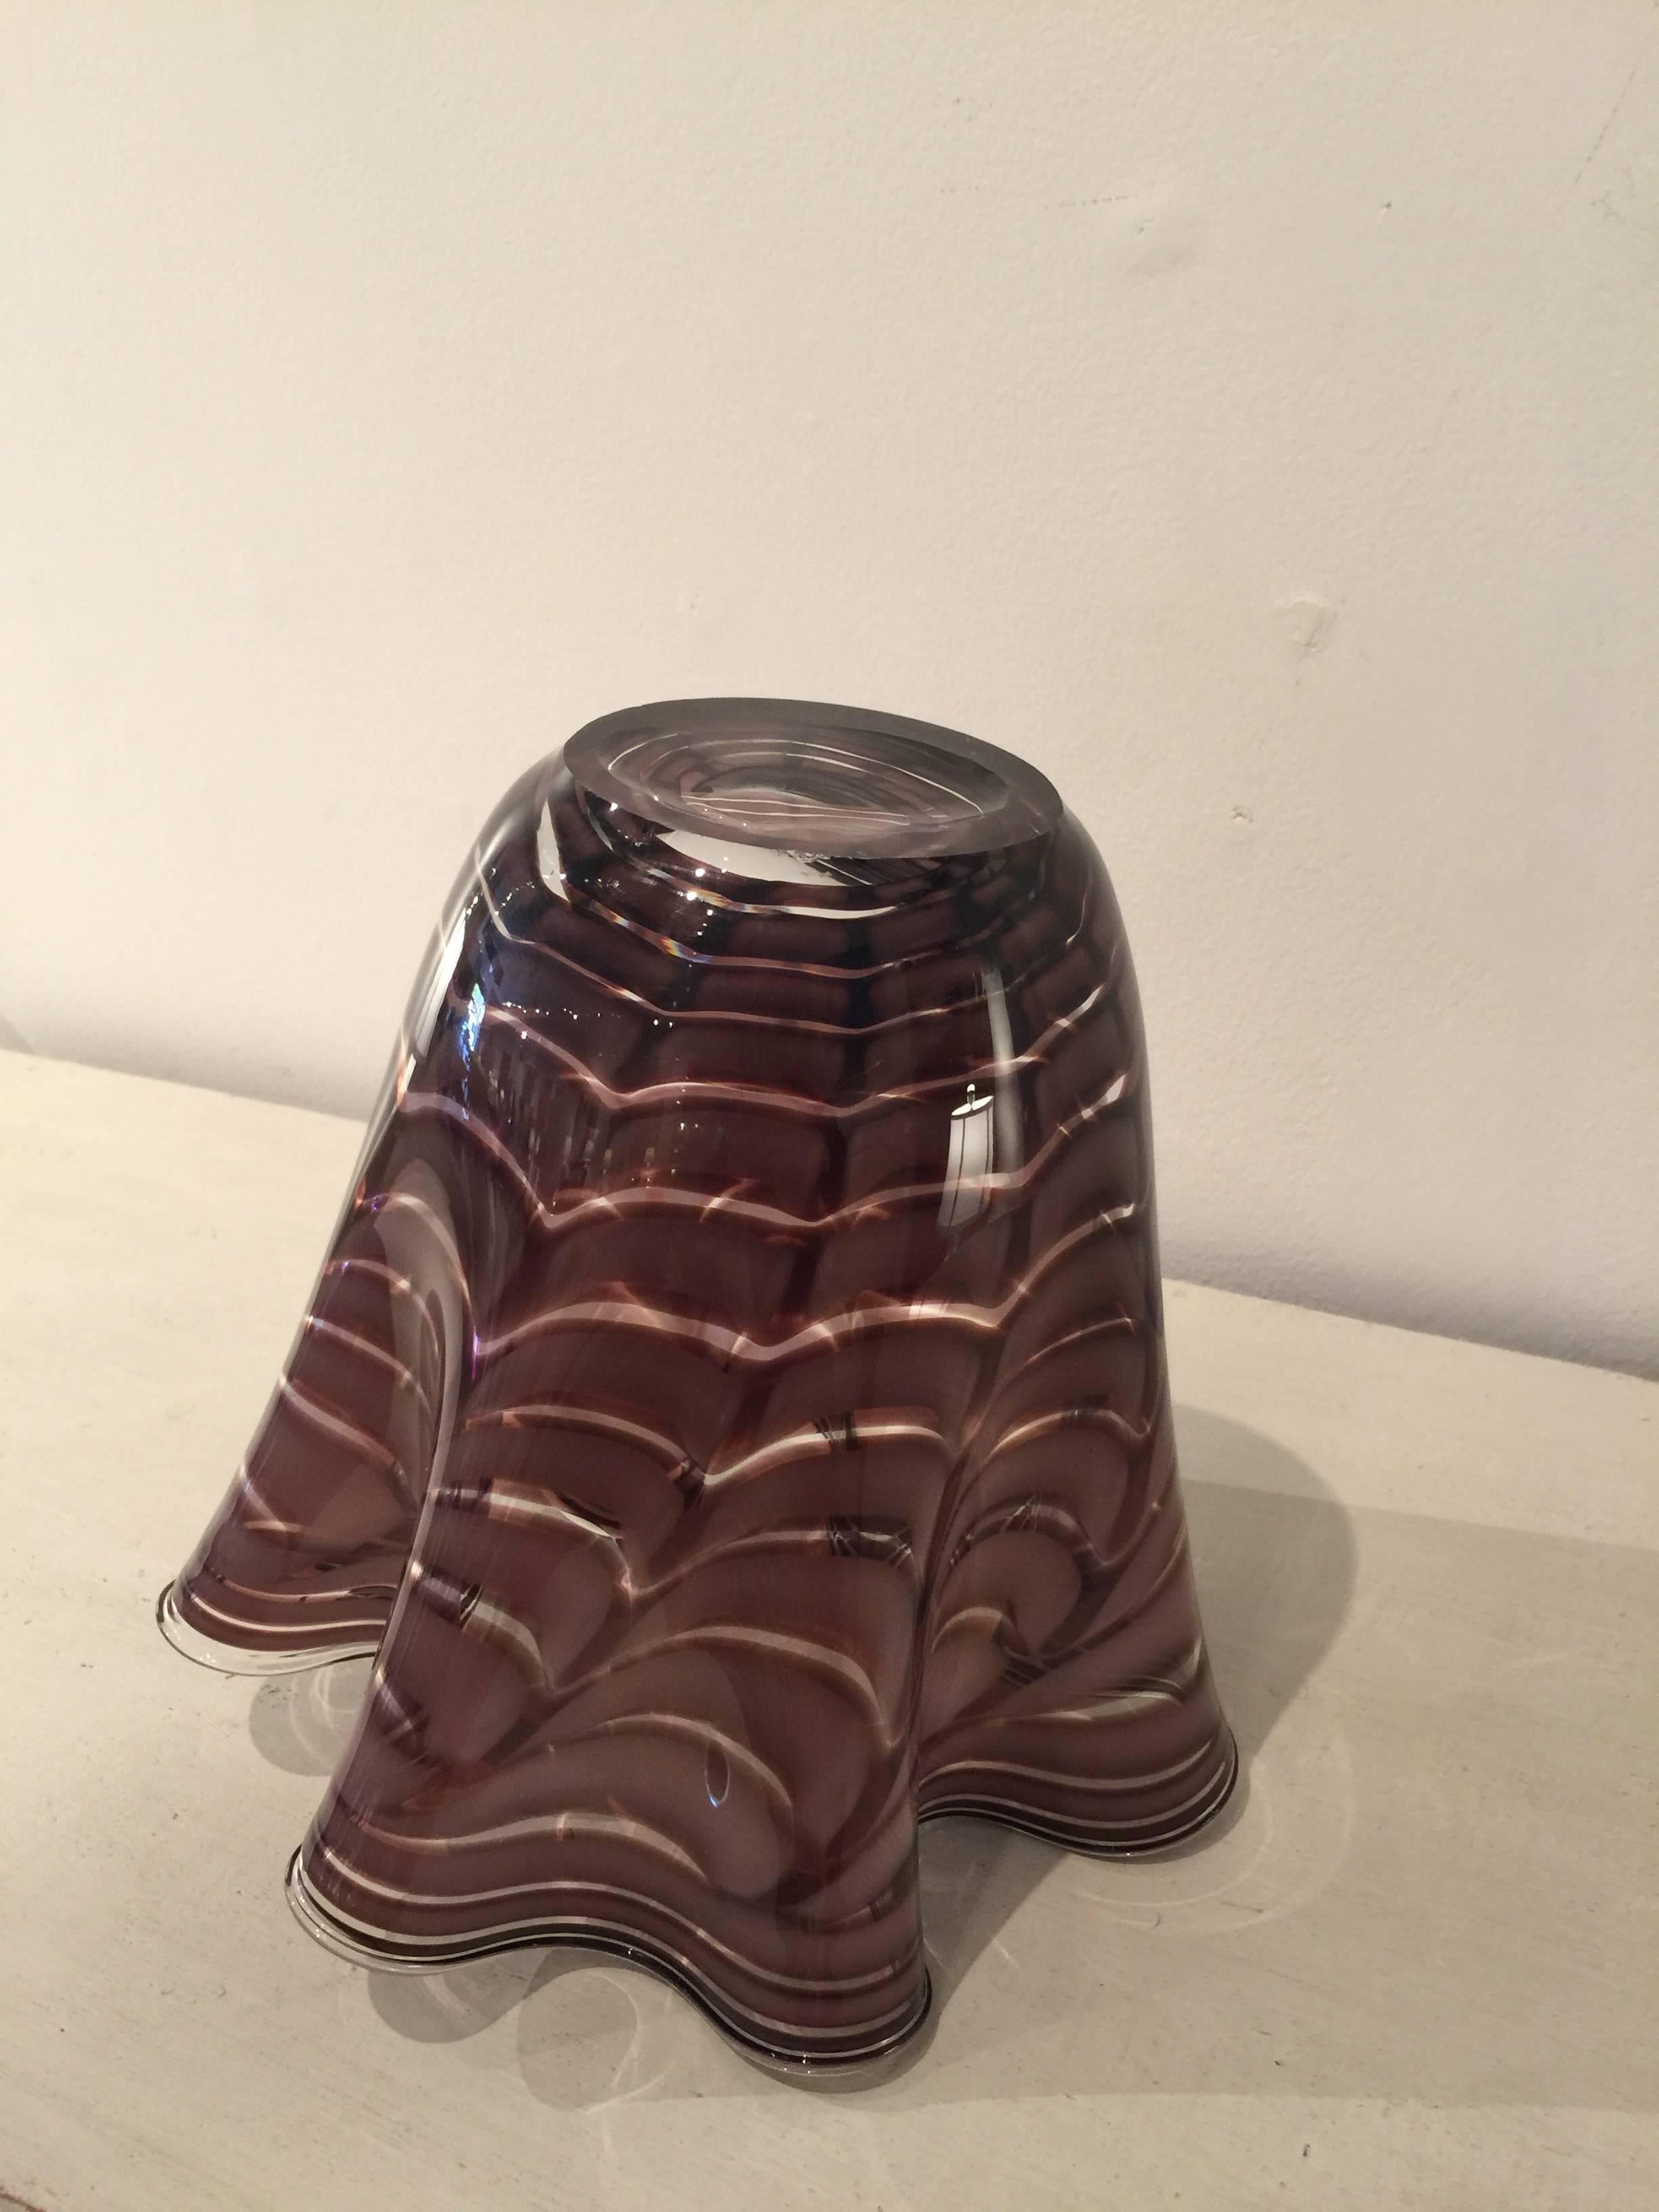 Vintage Murano glass vase with beautiful wave pattern.
Subtle colors of aubergine and violet throughout.
Measure: Diameter 12.5'' height 10